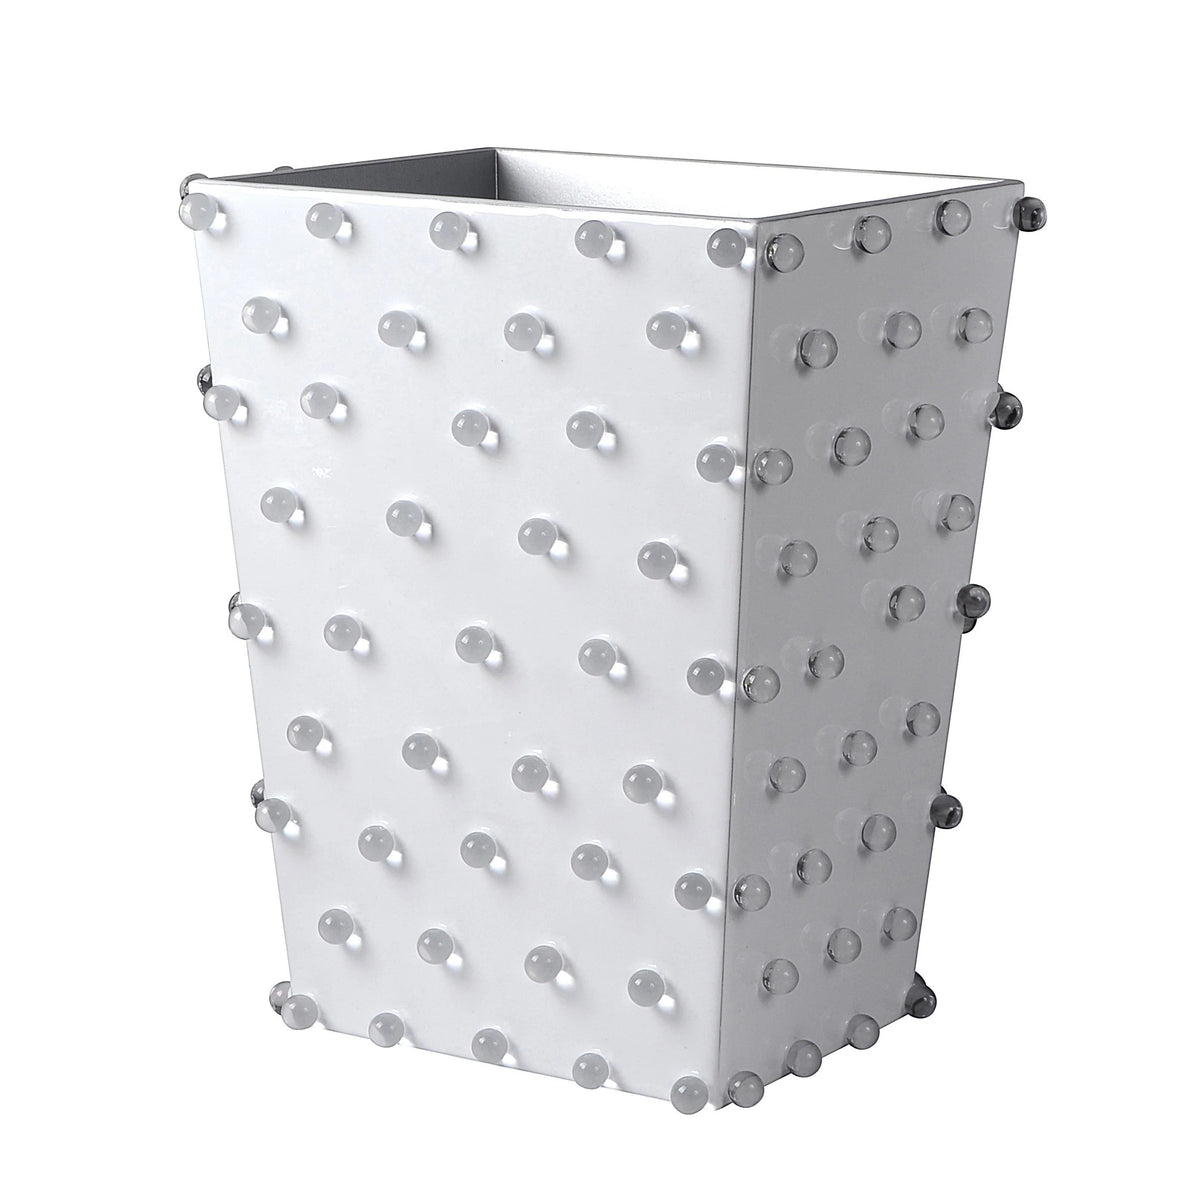 Mike and Ally Roxy Bath Accessories - Pure Wastebasket